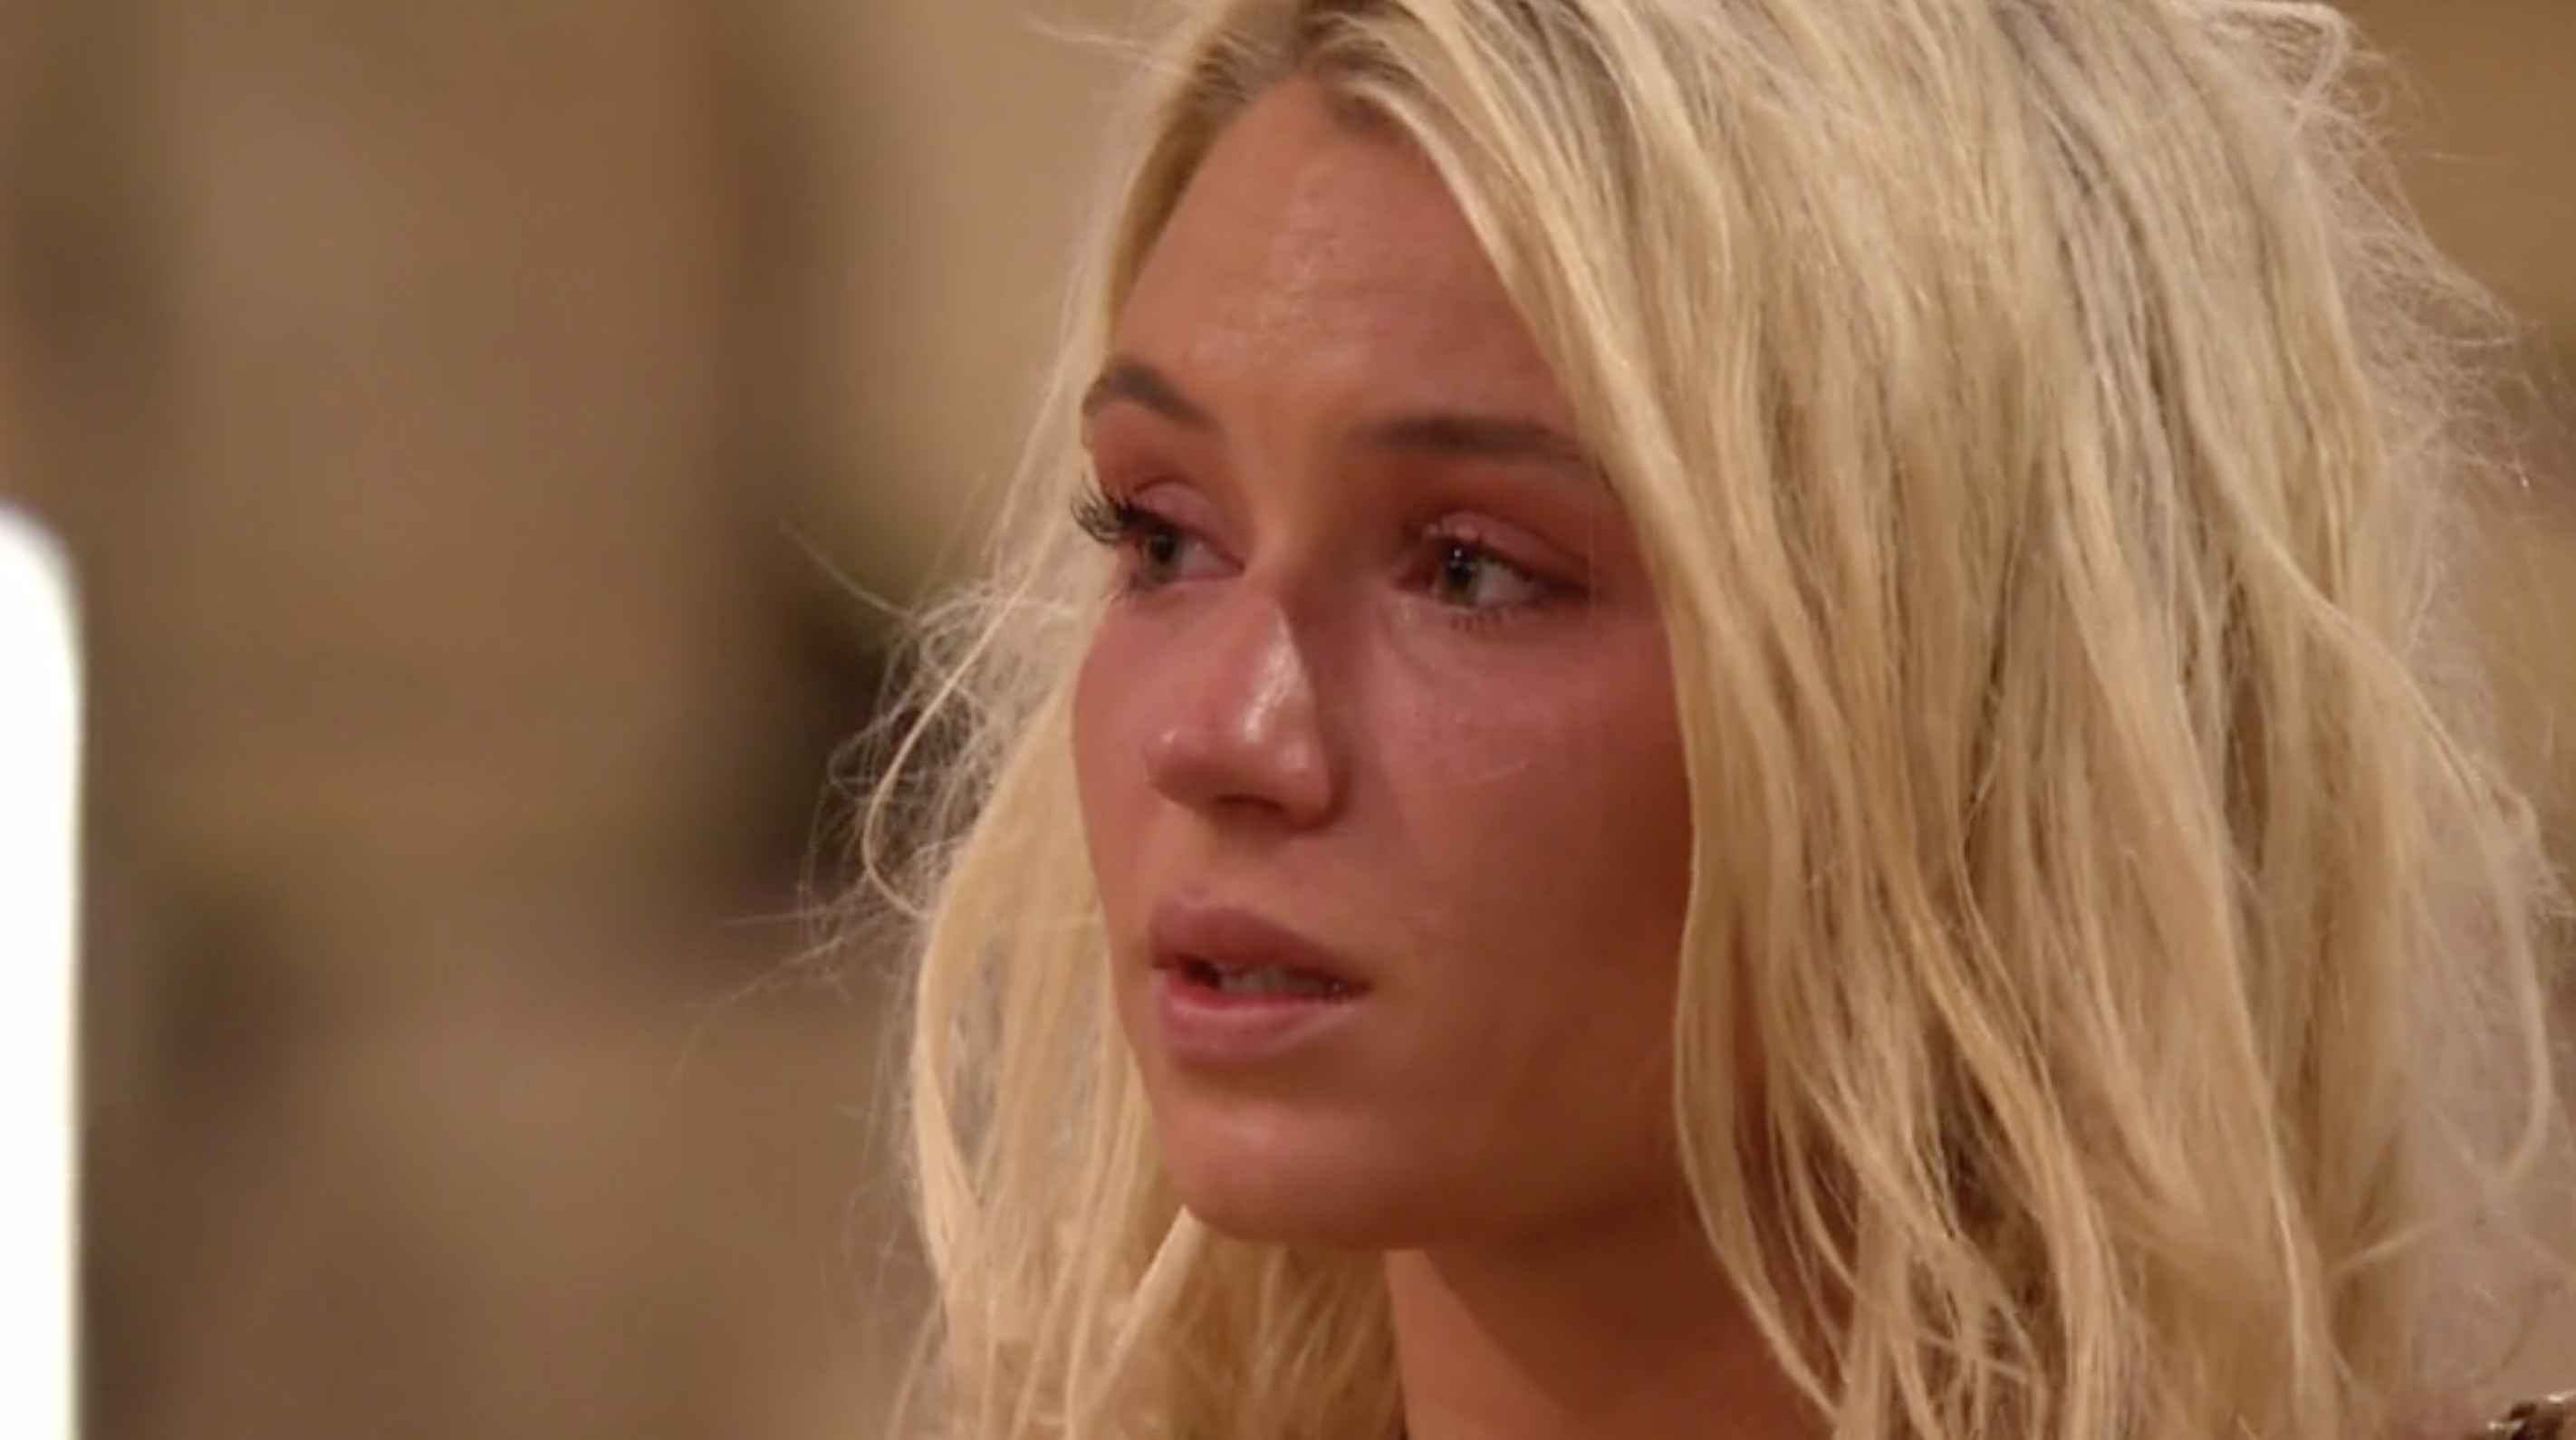 Opinion: Love Island bosses need to put an end to Amy bullying Lucie